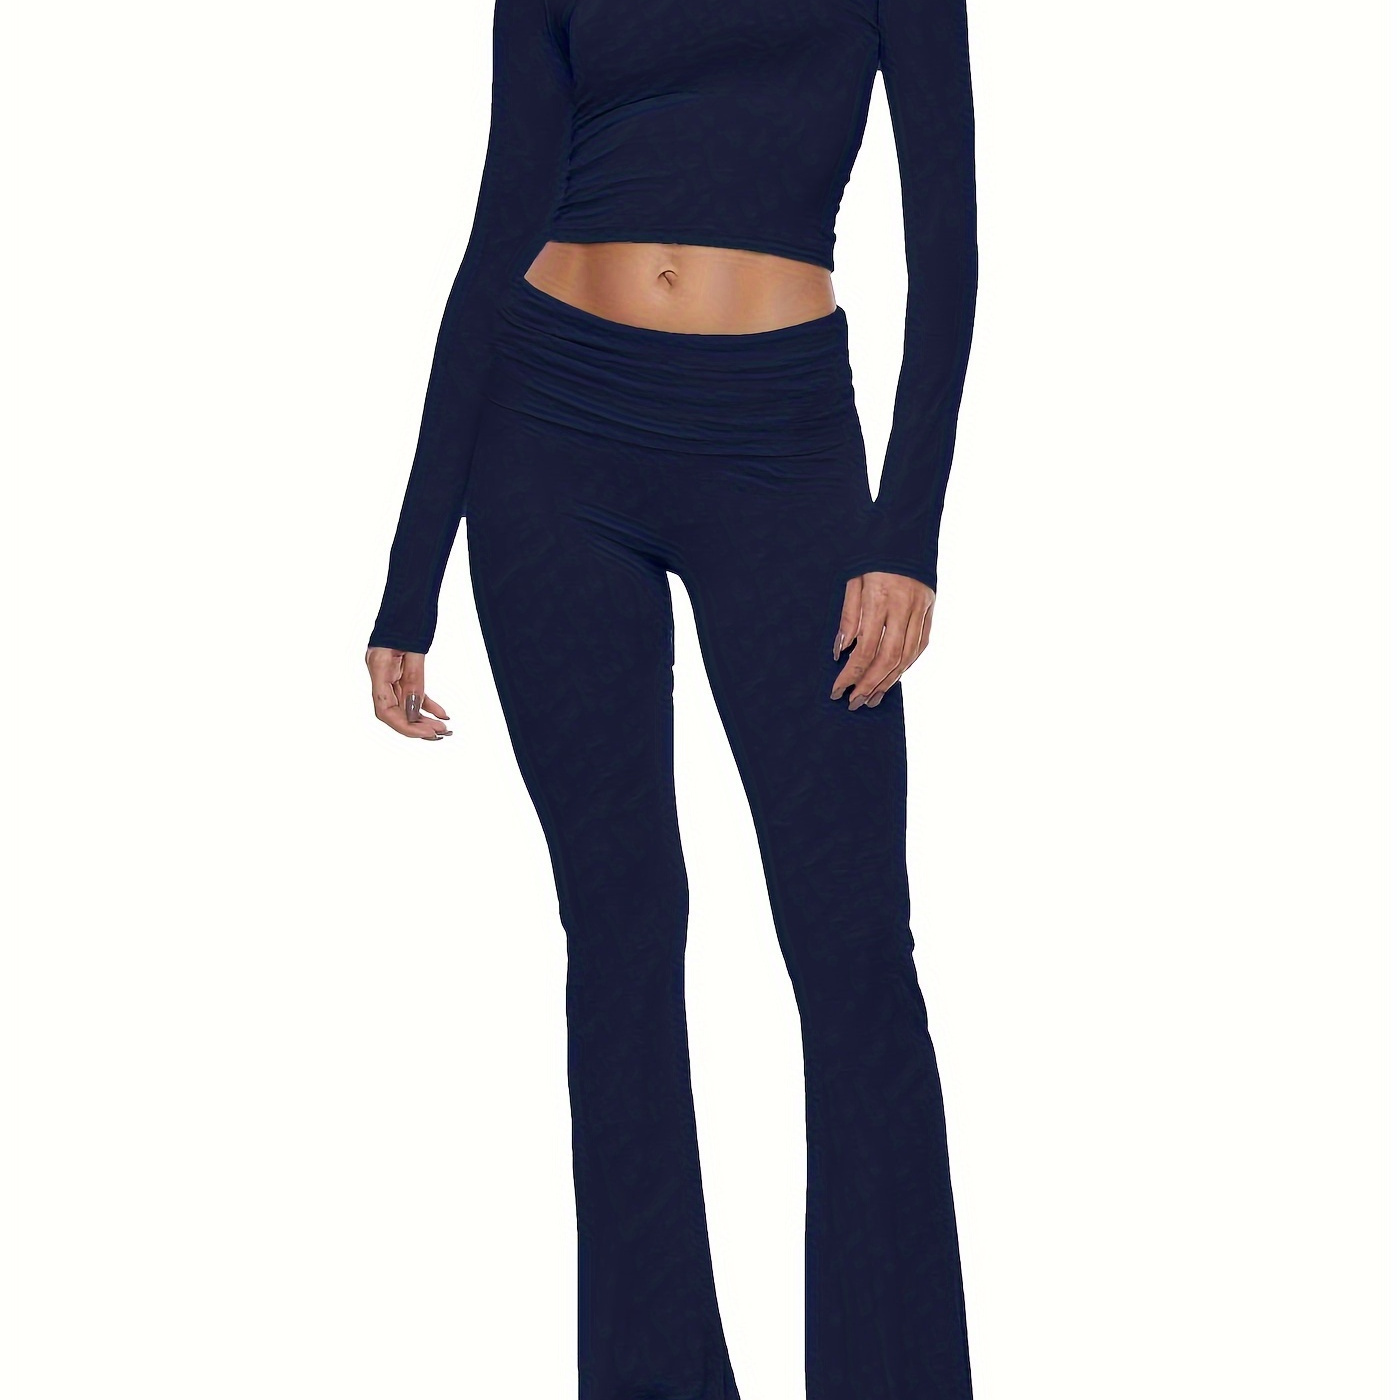 

Women's Casual Modal Lounge Set - Casual Long Sleeve Cropped Top With Flare Pants - Comfortable Pajama Outfit For Home